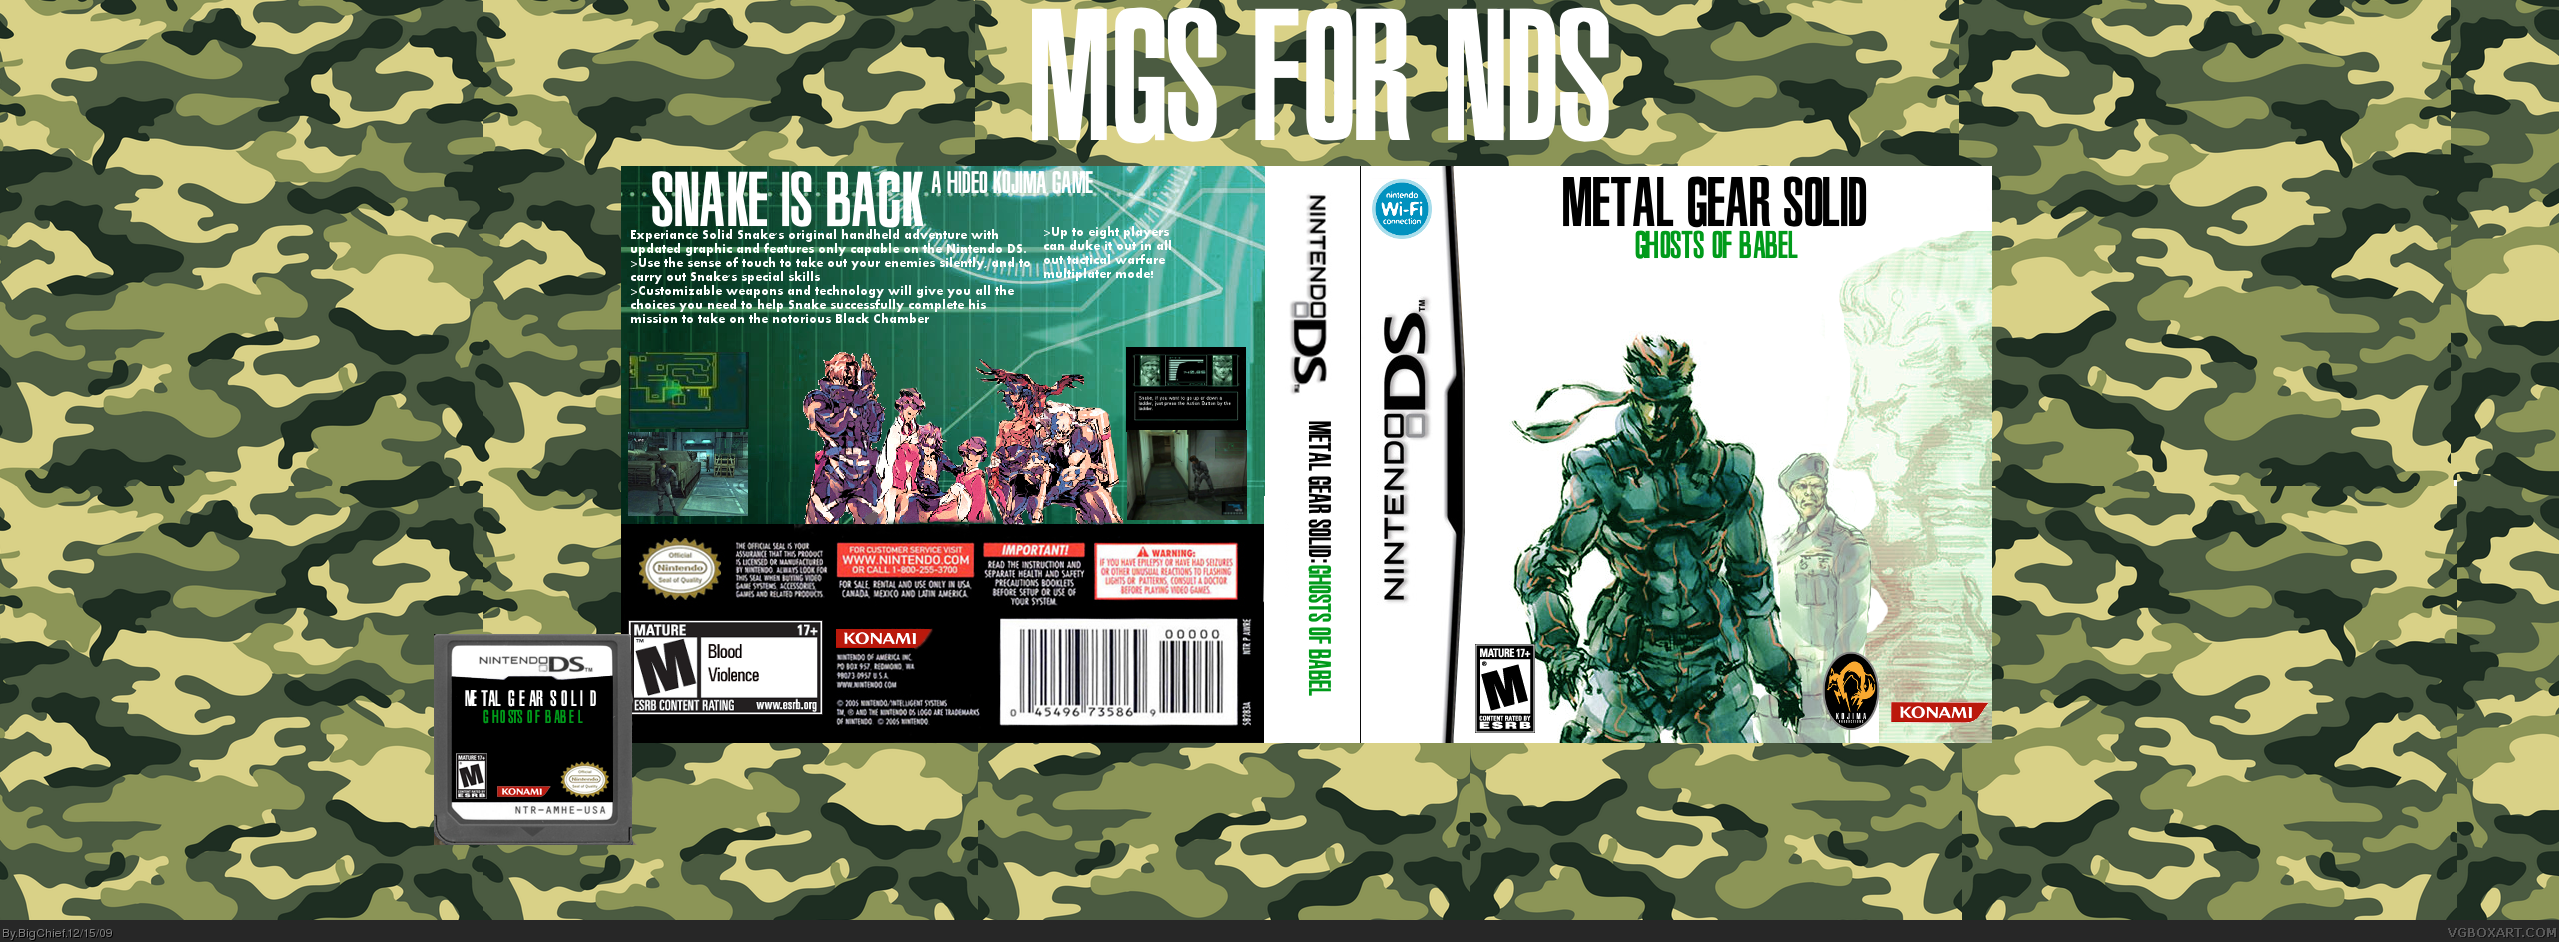 Metal Gear Solid: Ghosts of Babel box cover